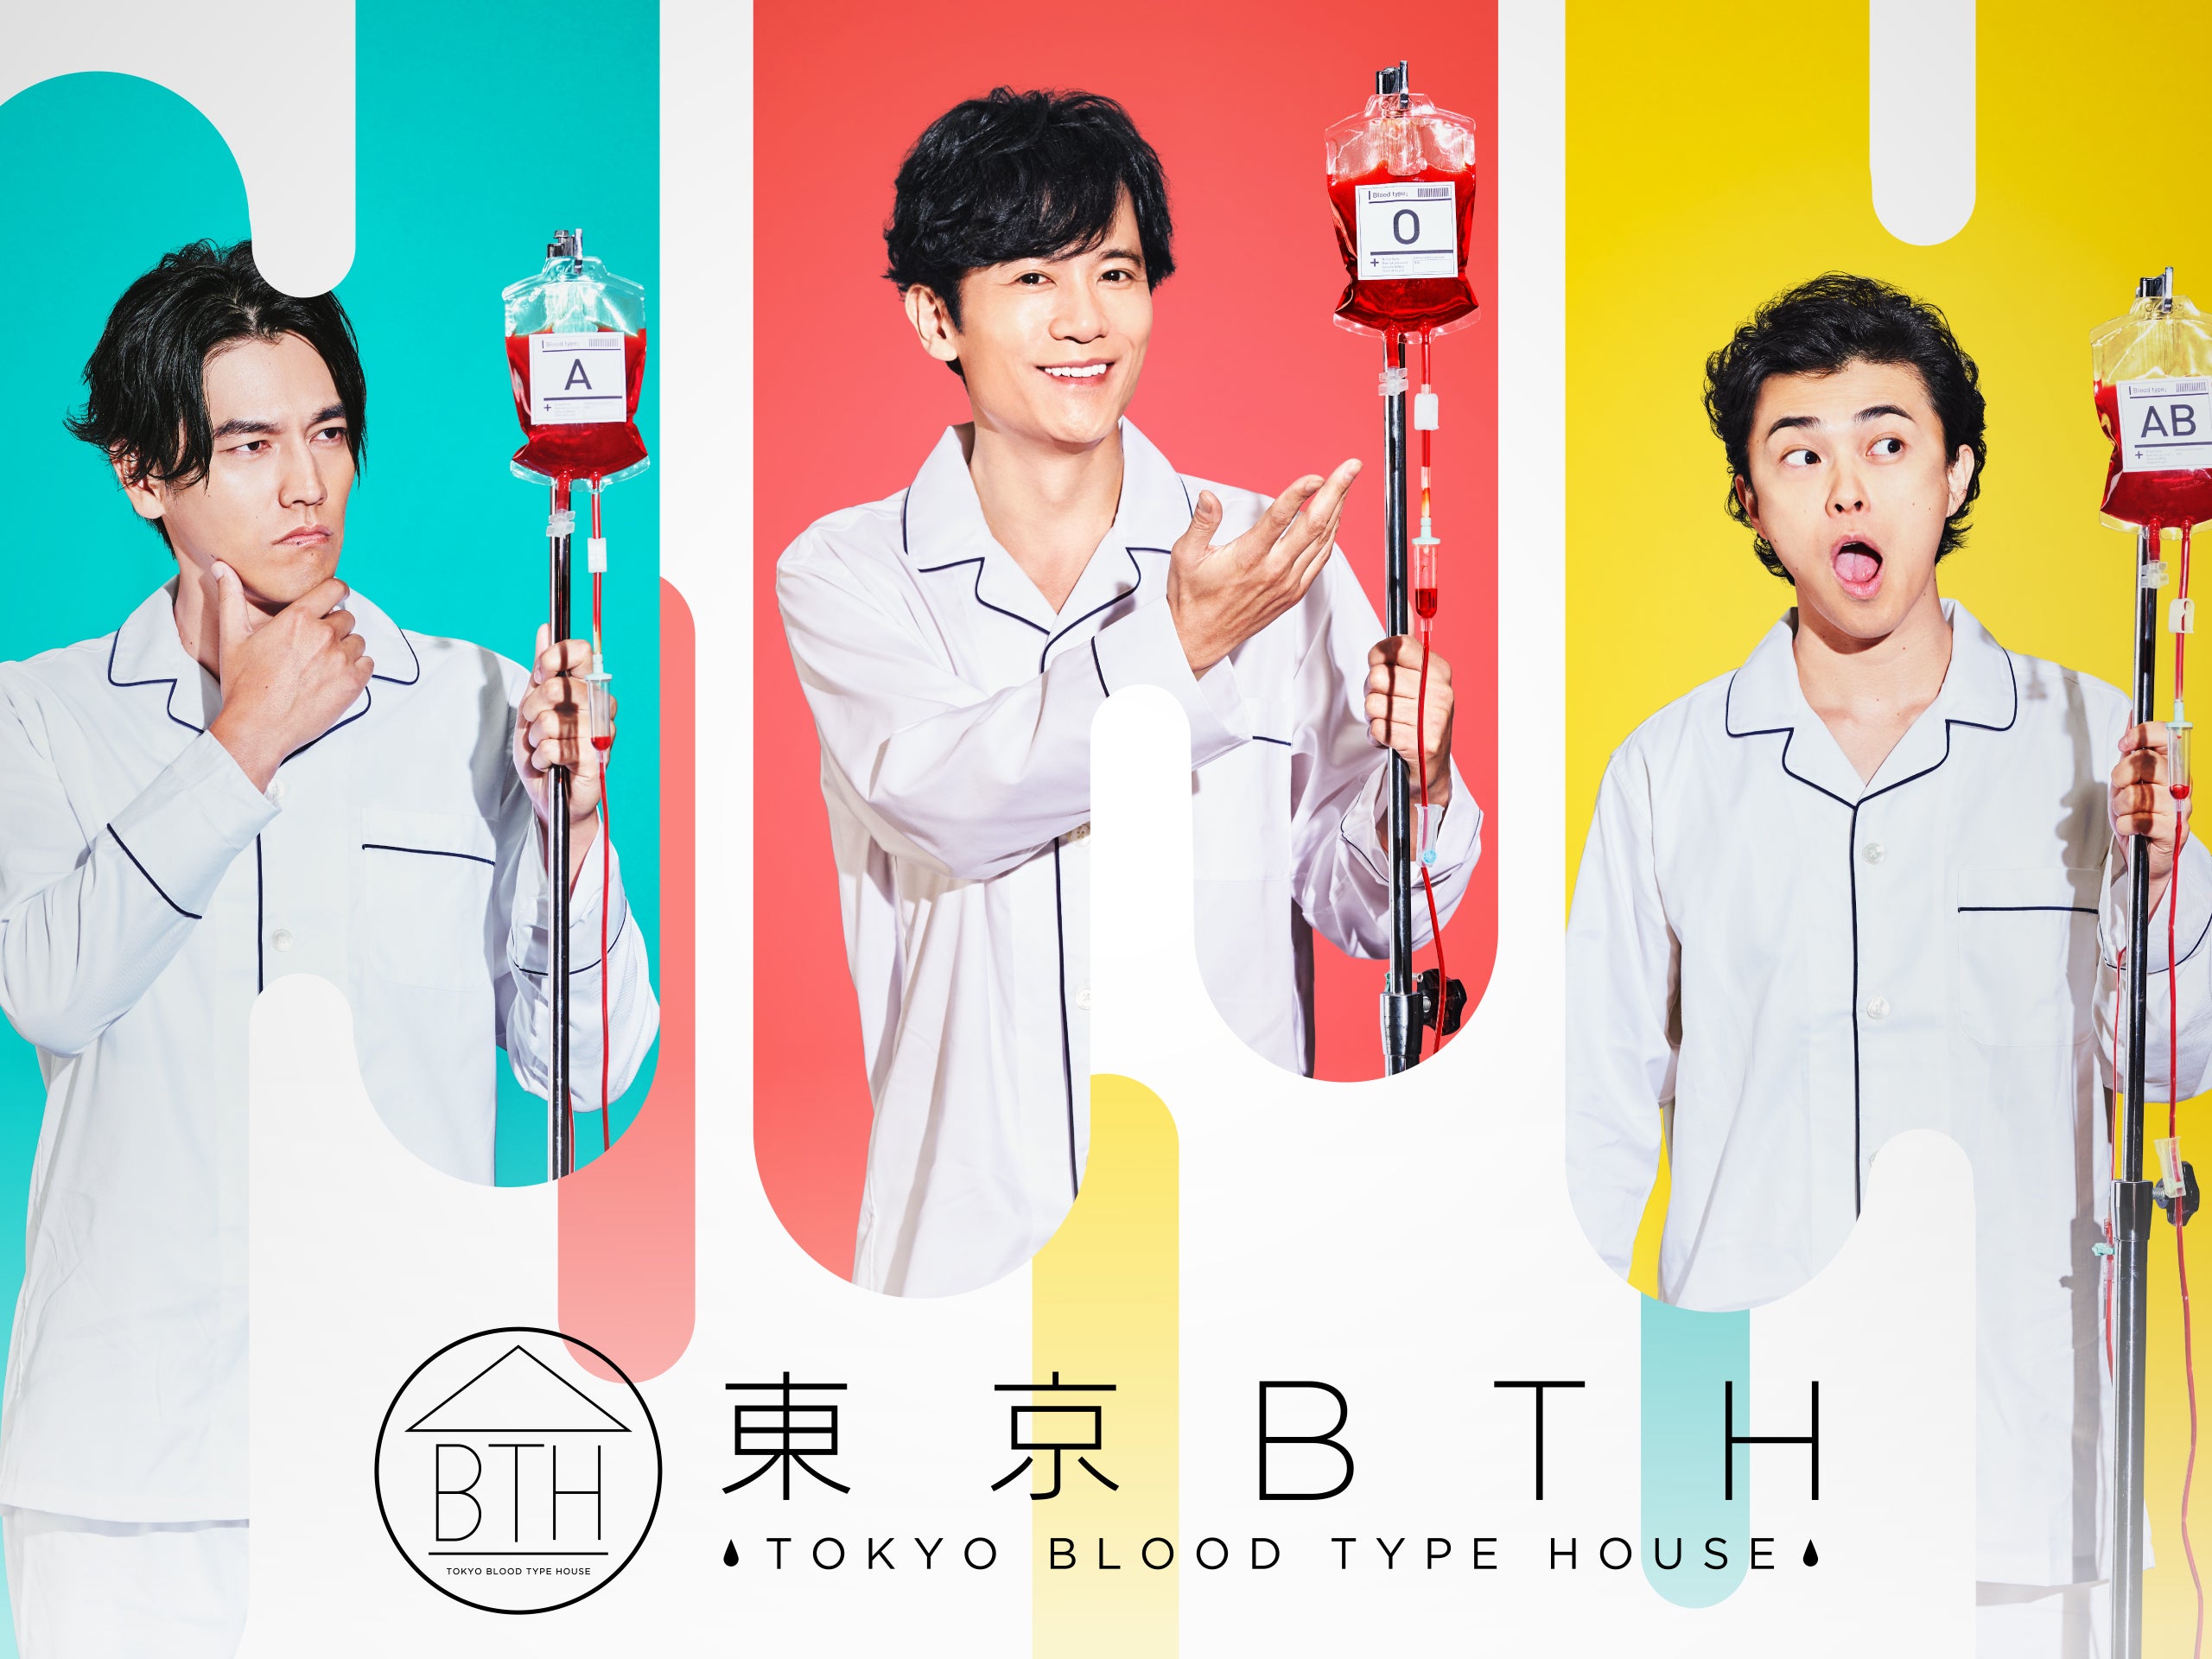 TV ratings for Tokyo Bth: Tokyo Blood Type House (東京BTH〜TOKYO BLOOD TYPE HOUSE〜) in Malaysia. Amazon Prime Video TV series